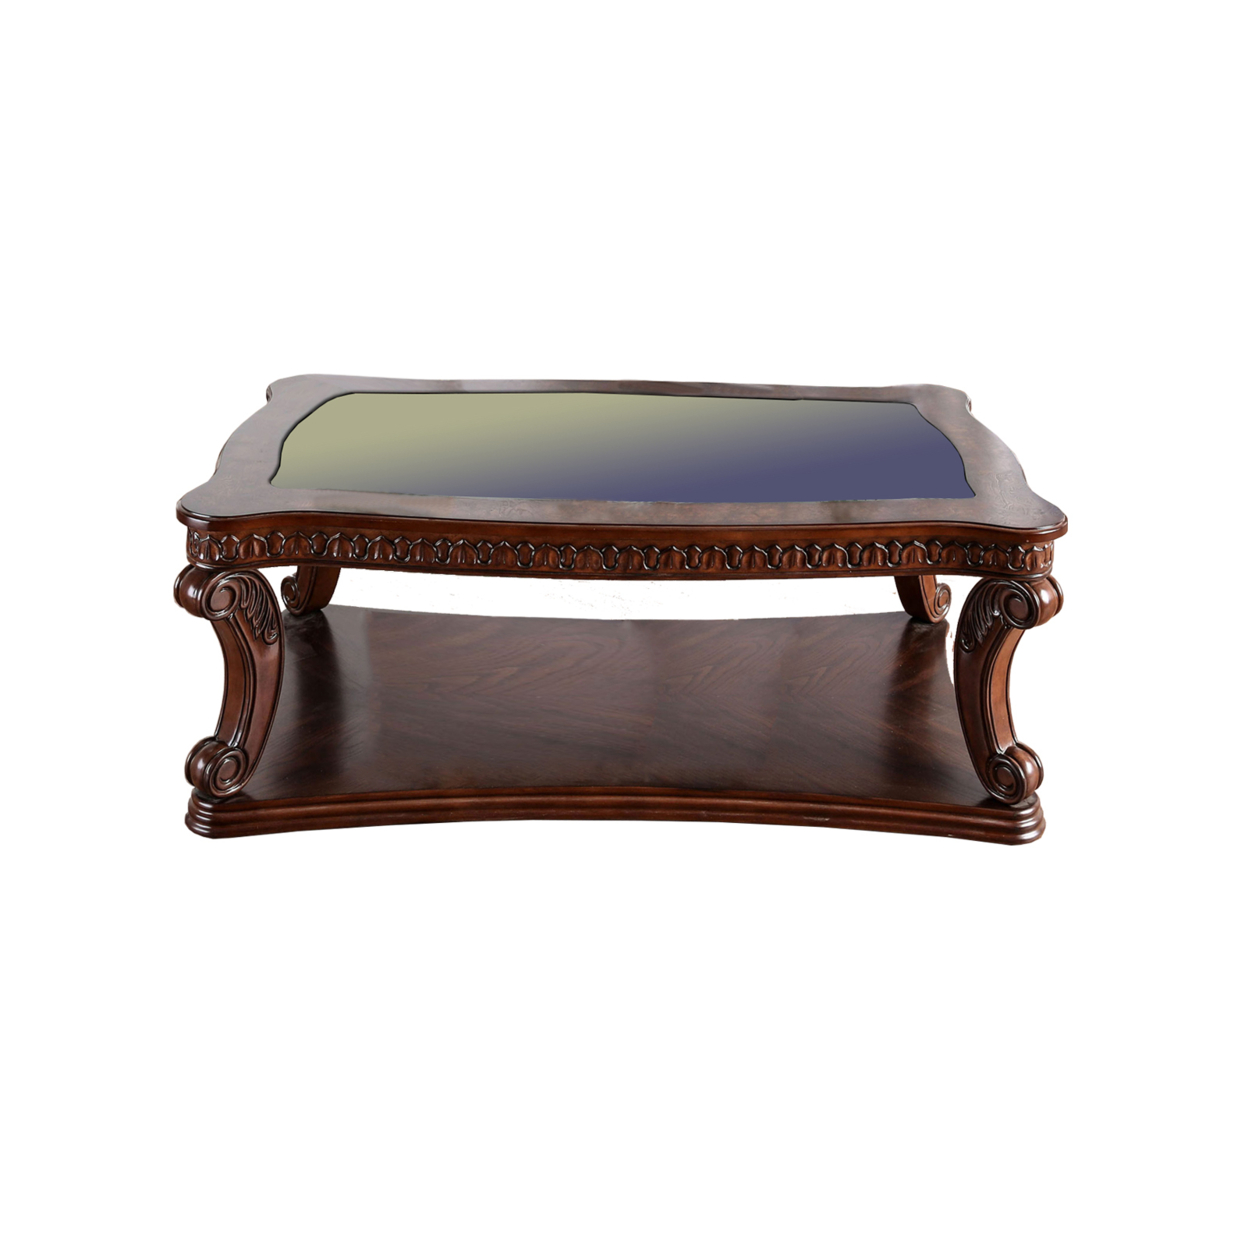 Traditional Coffee Table With Cabriole Legs And Wooden Carving, Brown- Saltoro Sherpi